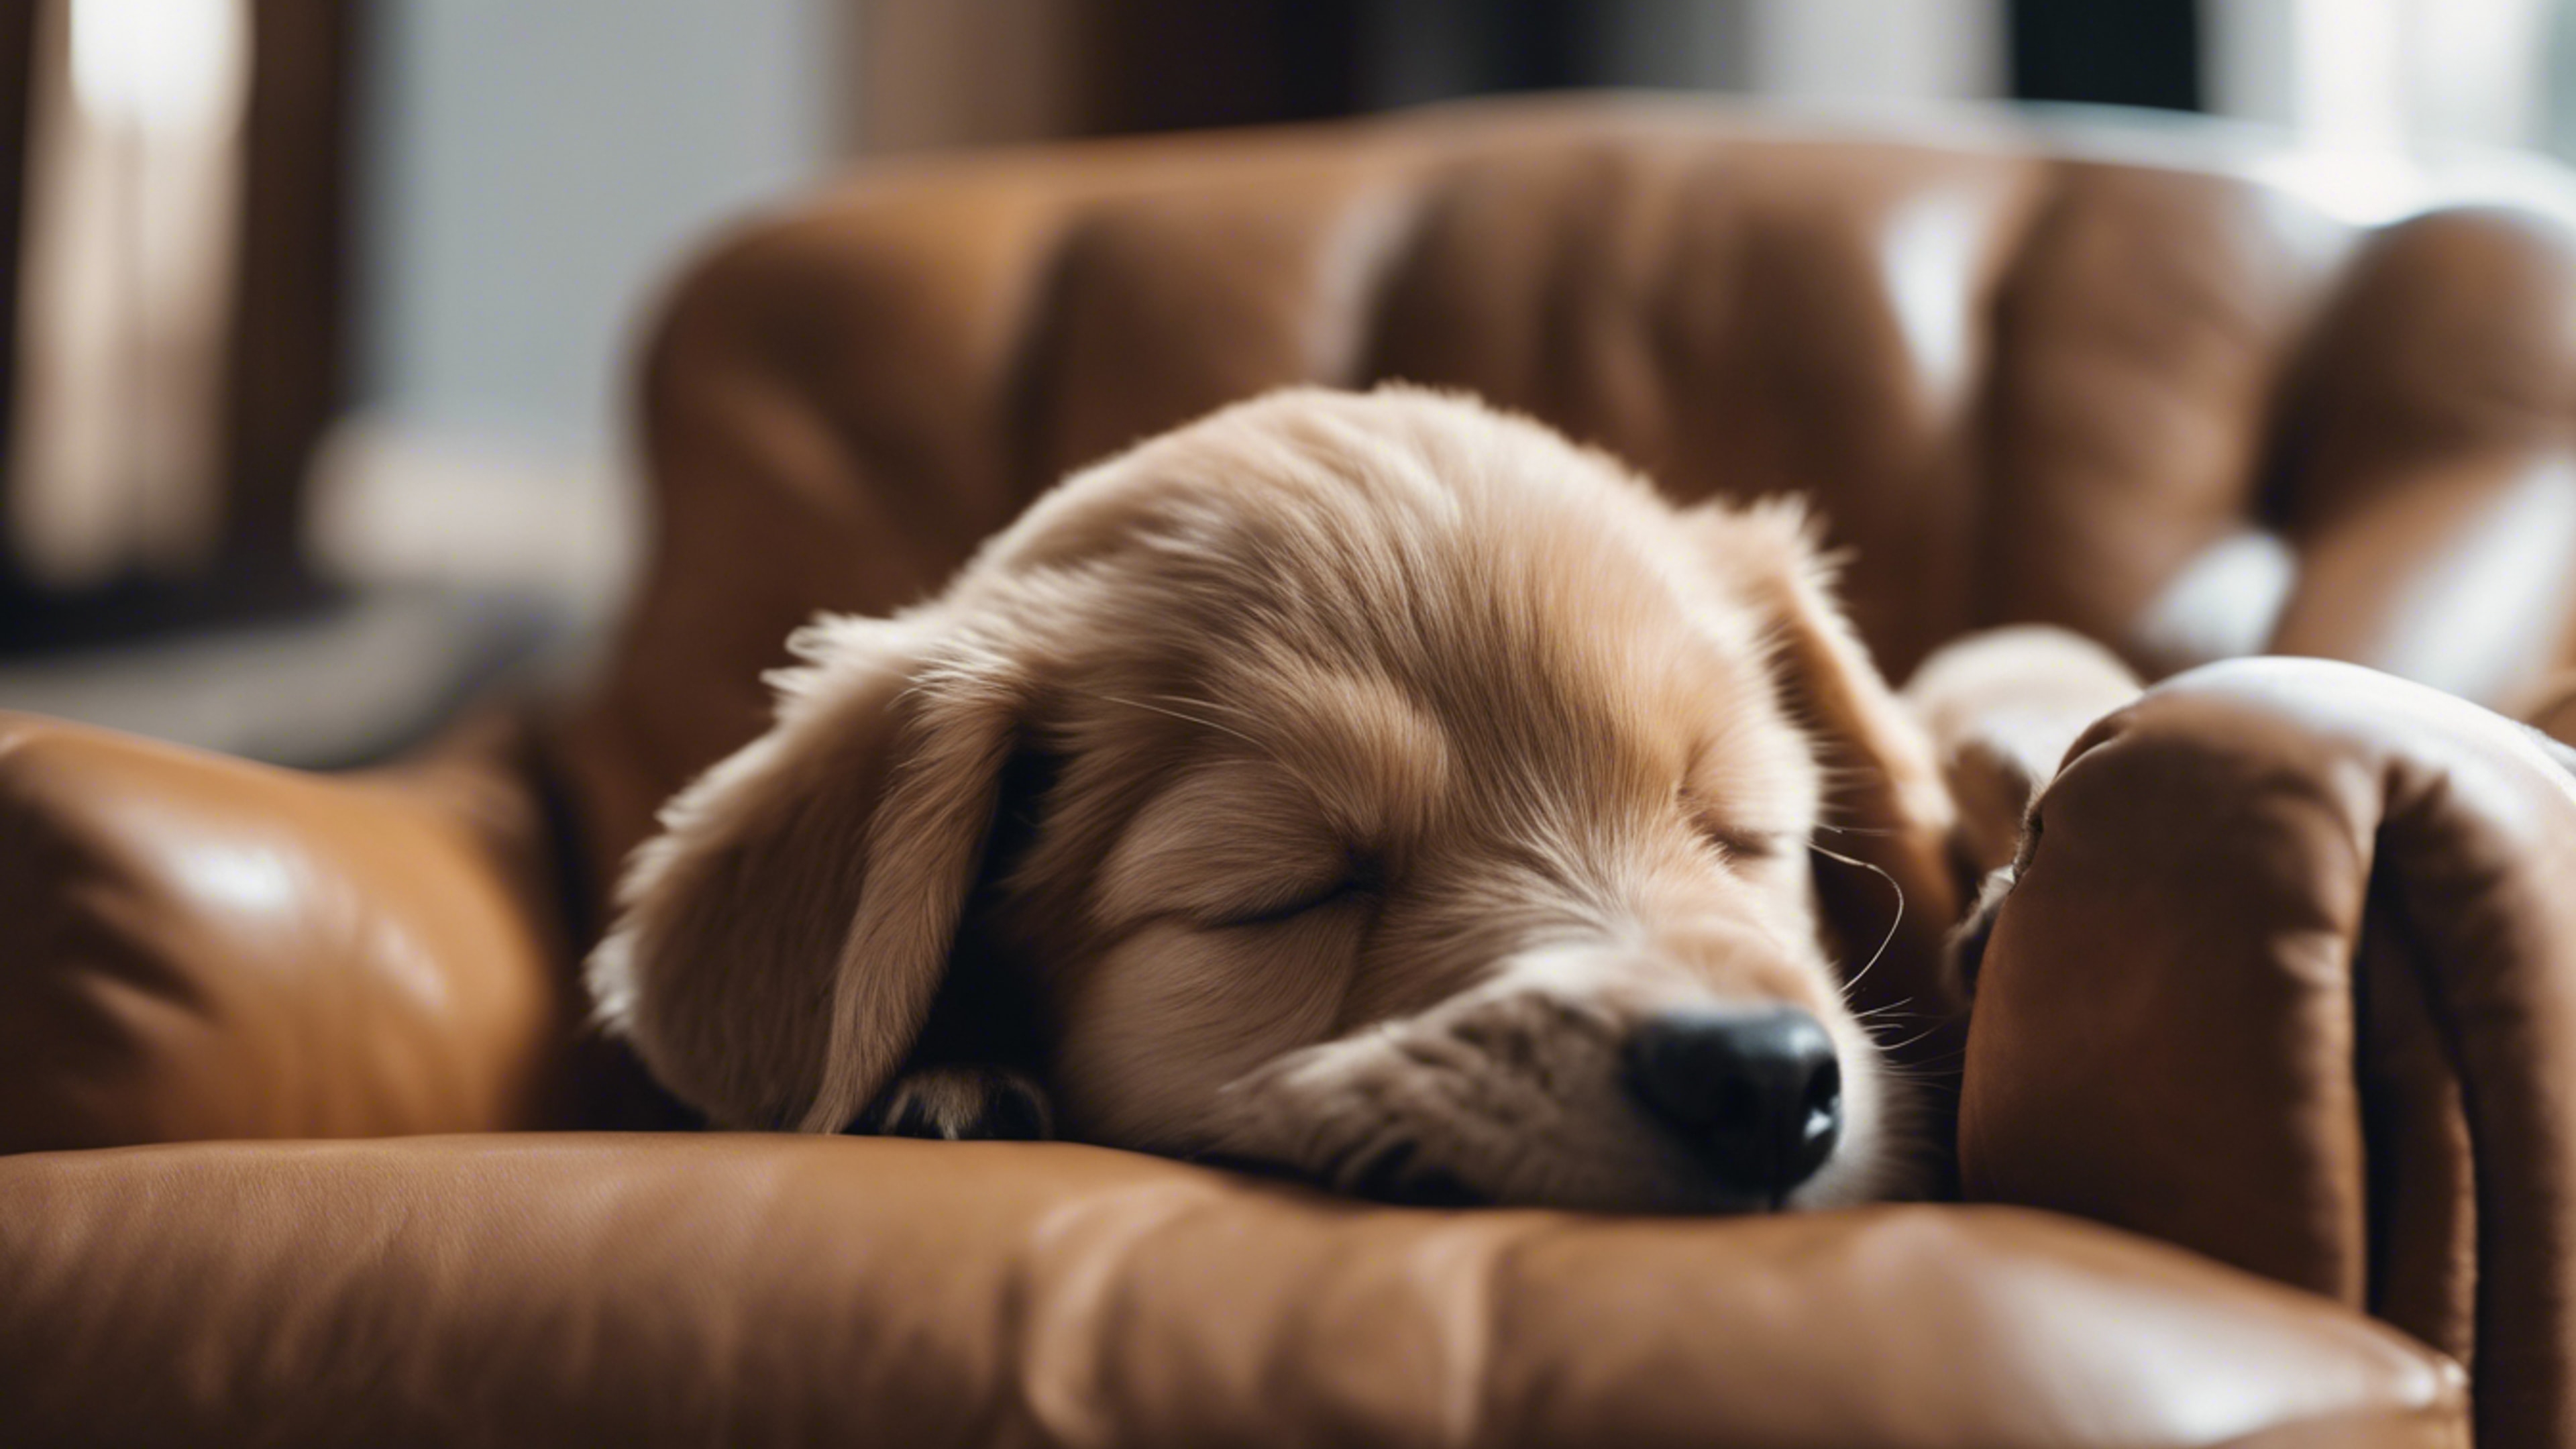 A cute puppy snoozing on a comfortable, oversized brown leather armchair.壁紙[9200ee1466b7462a9782]